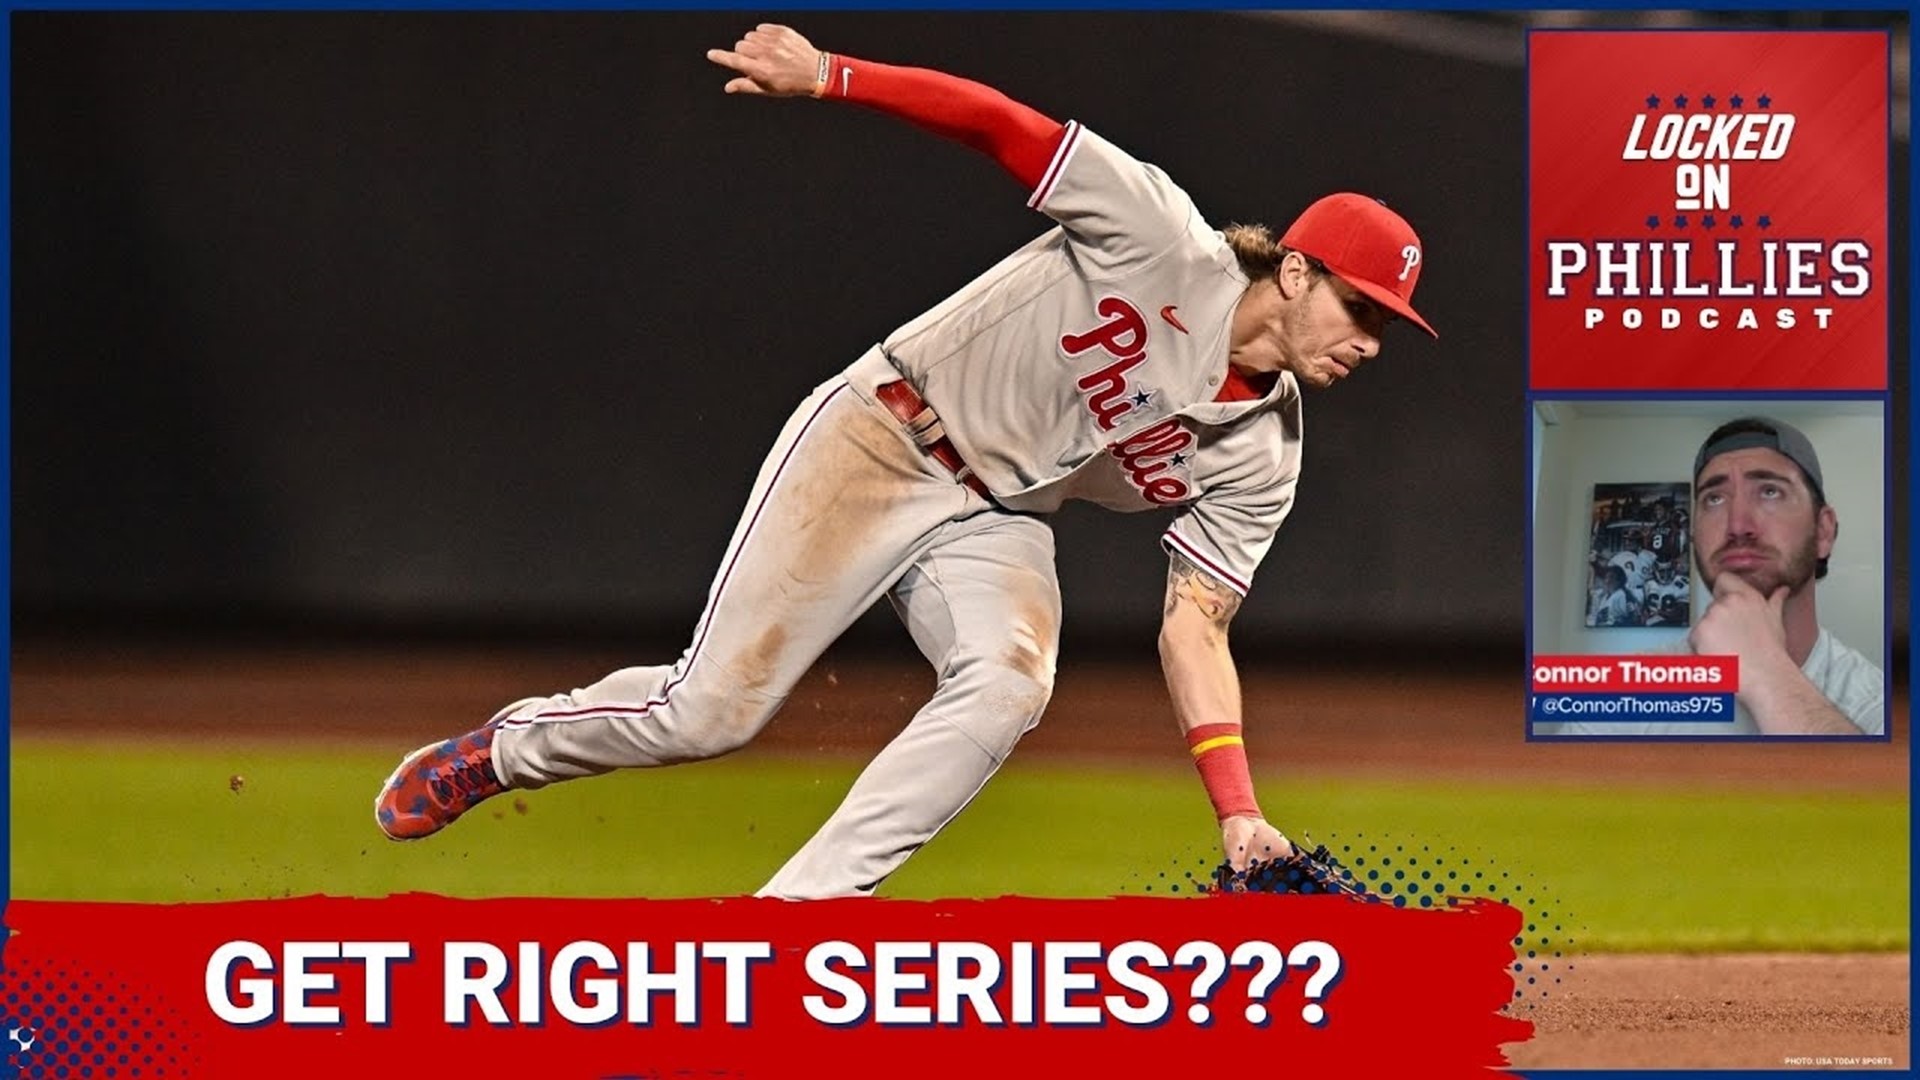 In today's episode, Connor breaks down the Philadelphia Phillies' matchup with the Washington Nationals tonight as the Phillies look to end a 4 game losing streak.